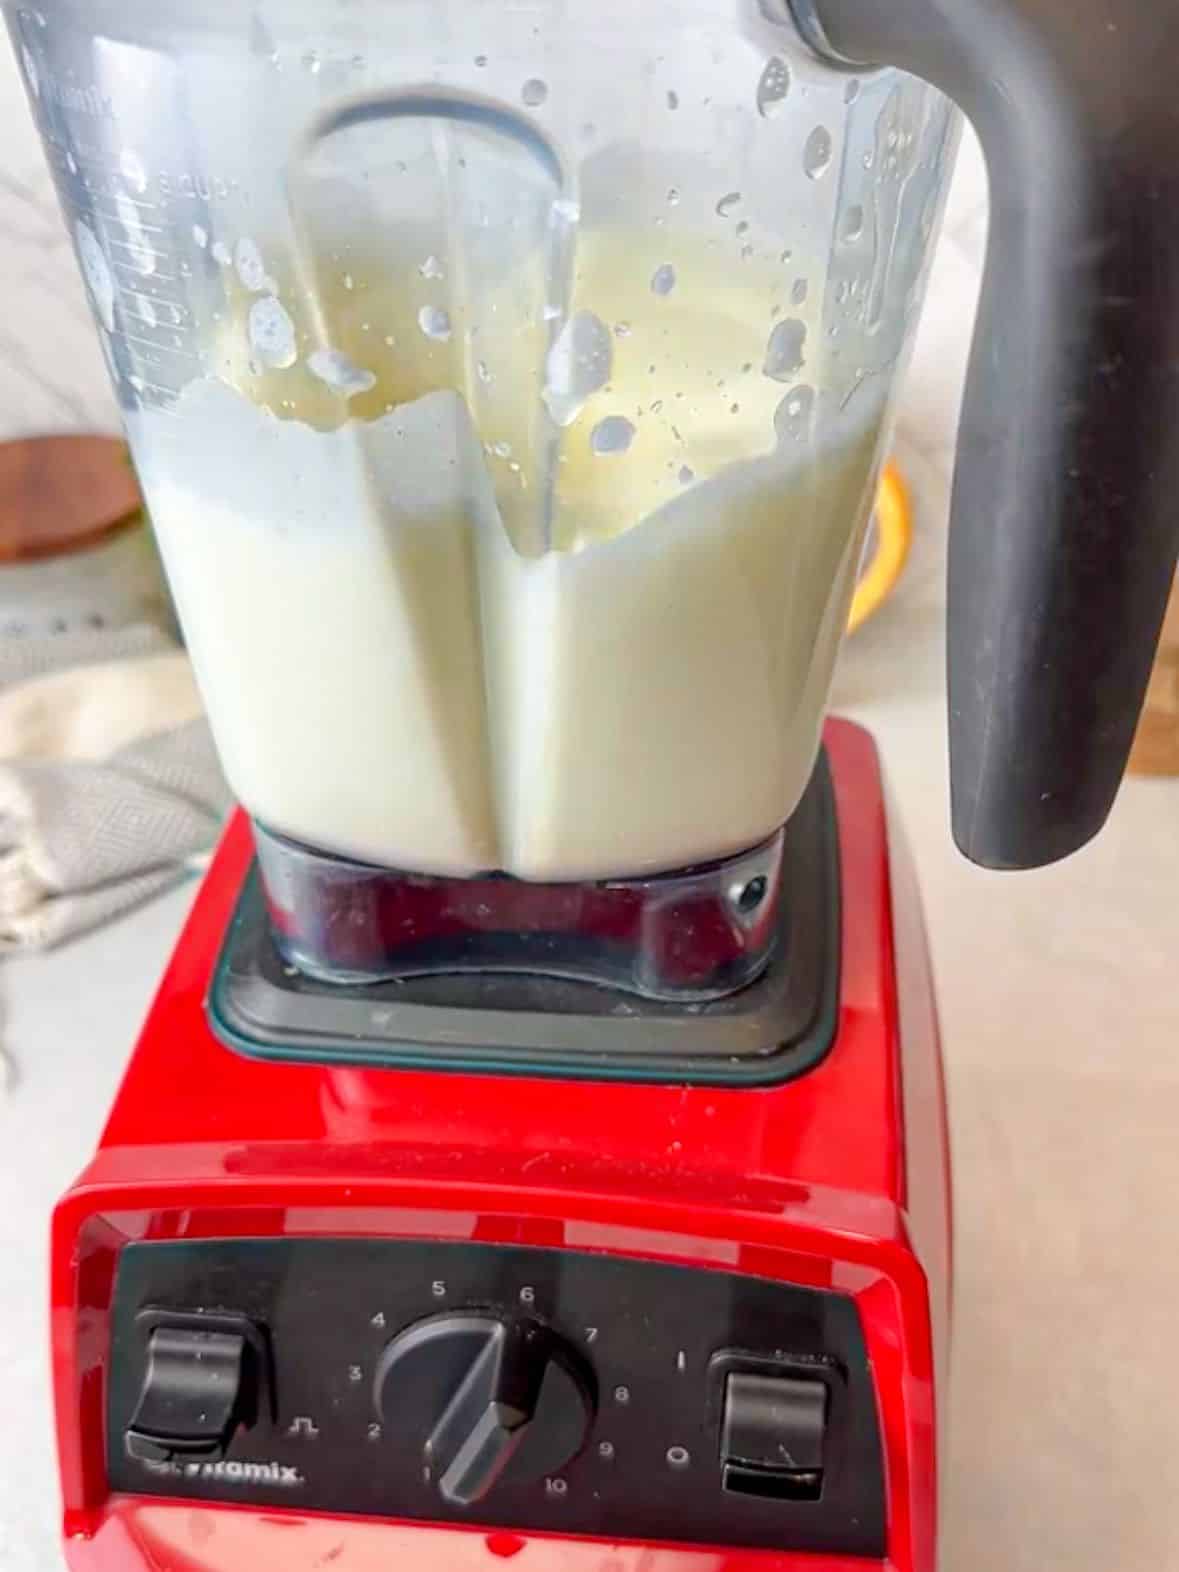 Blending the mixture on low for 3 whole minutes.